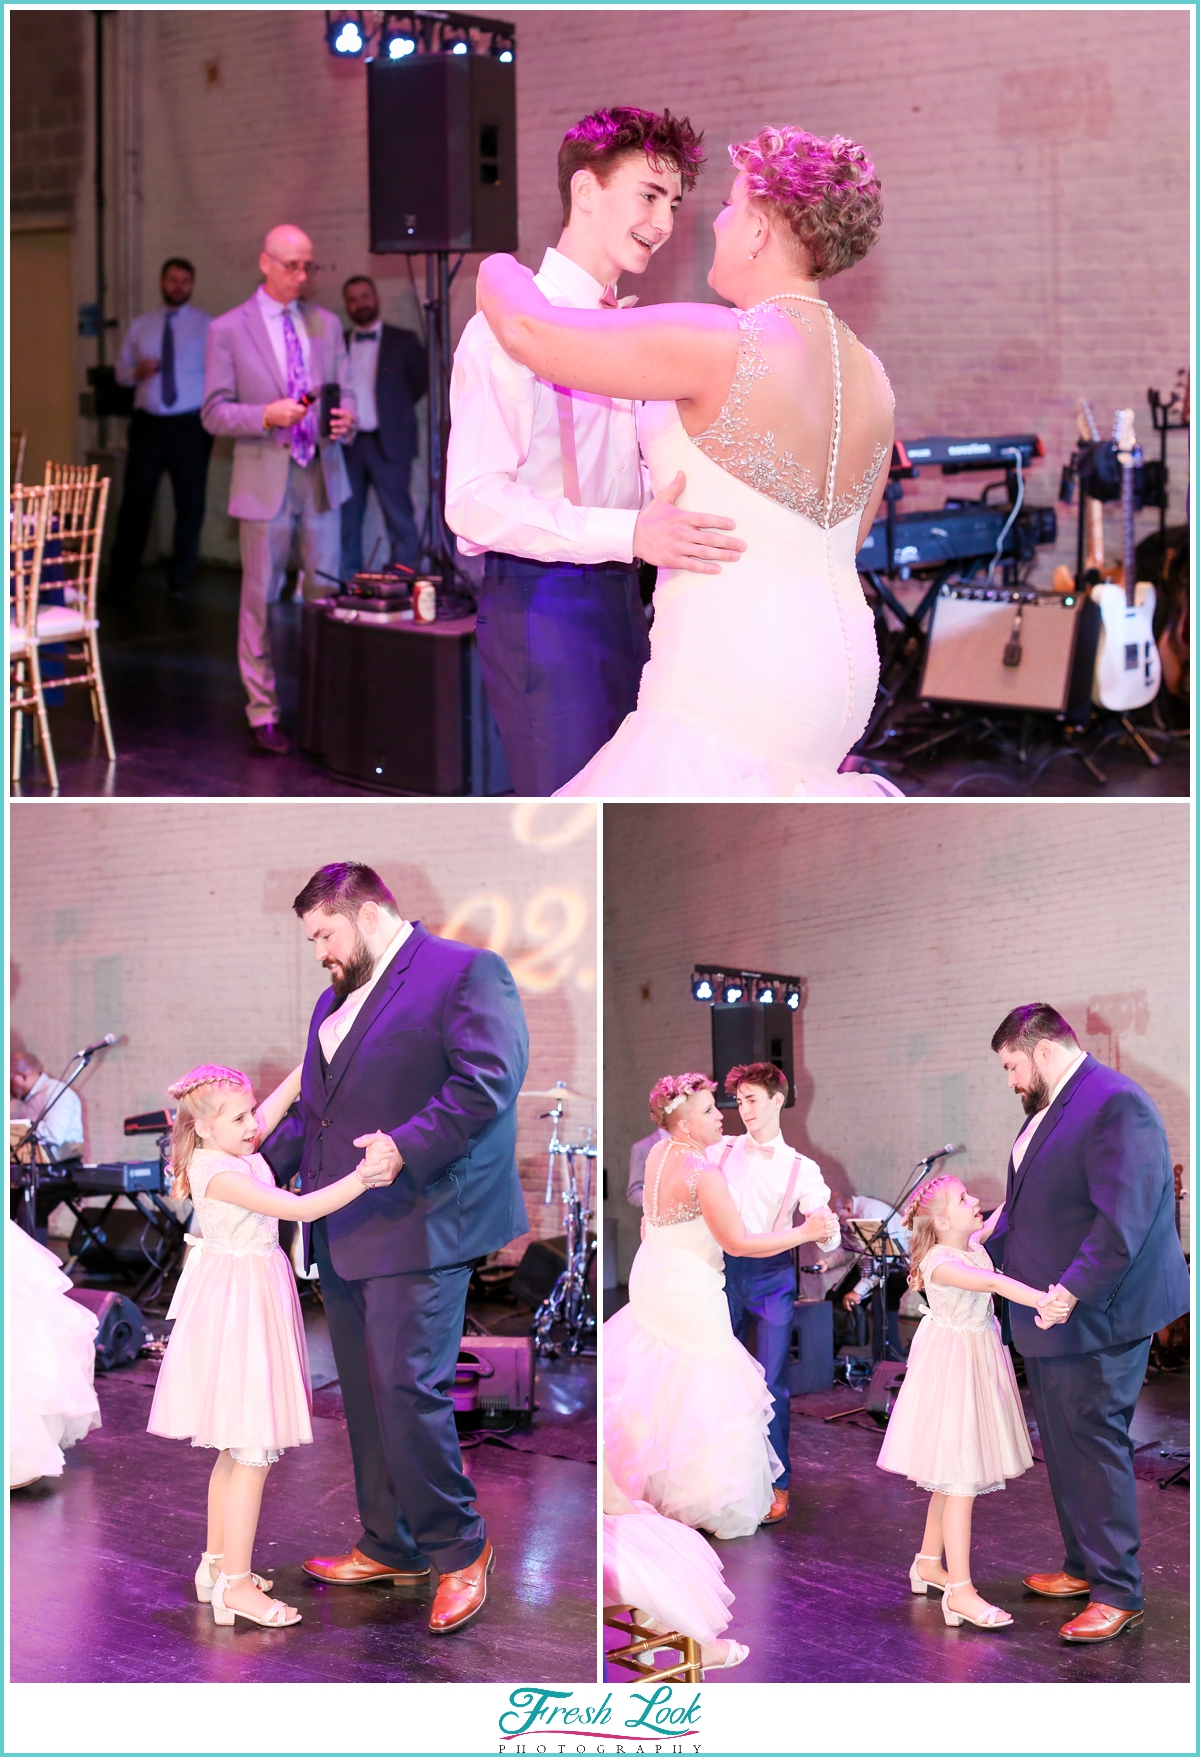 special family dance at reception